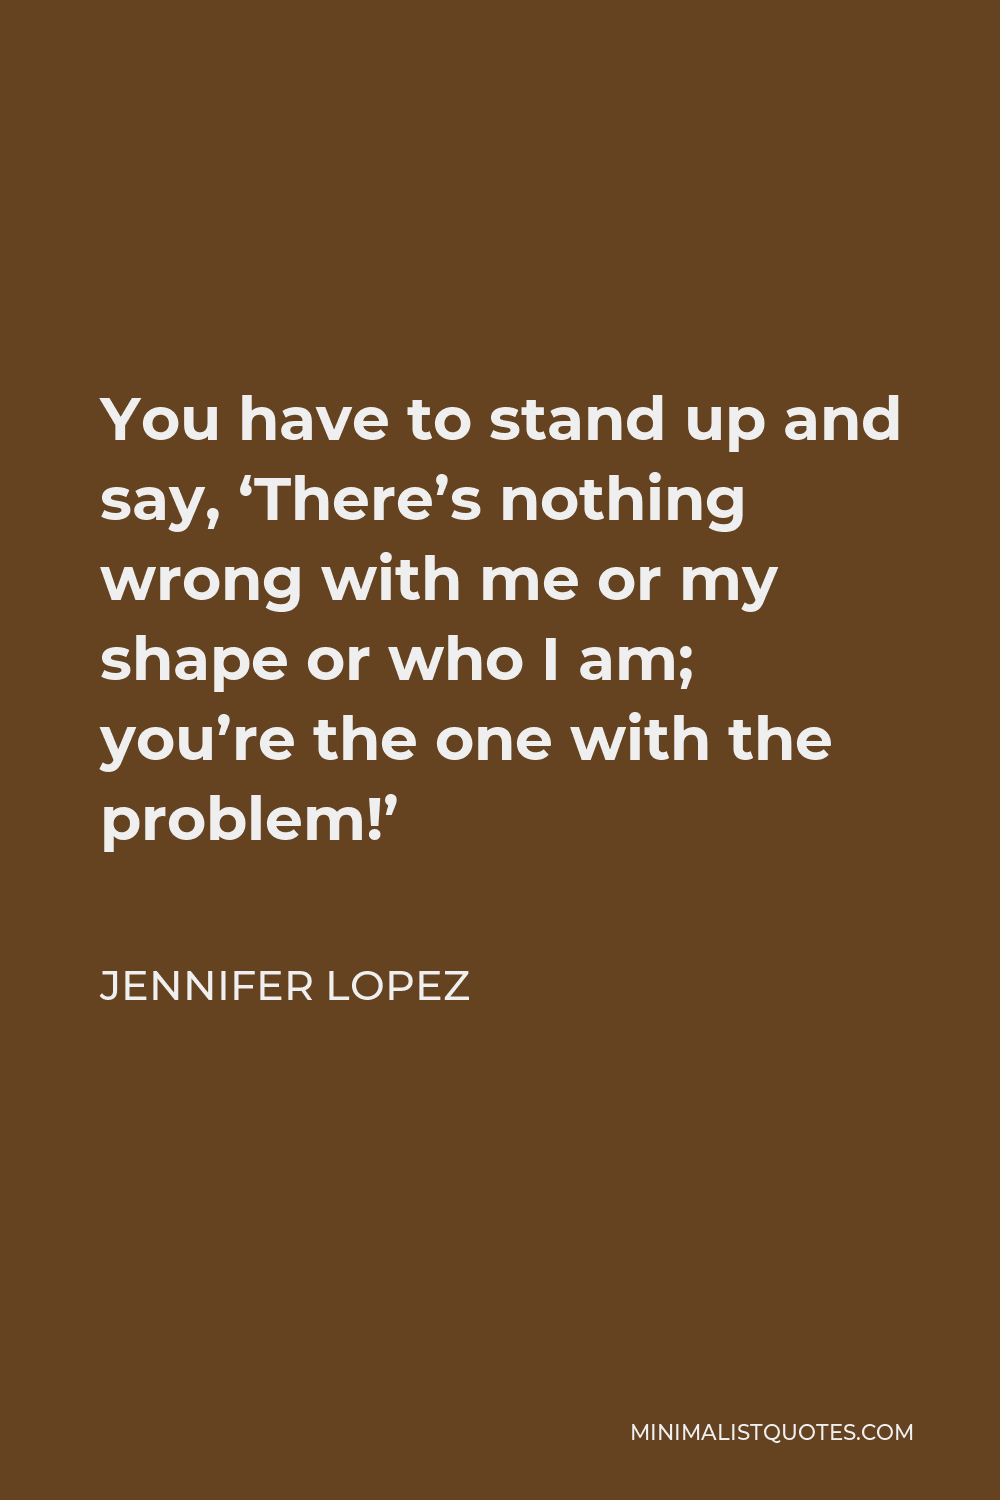 Jennifer Lopez Quote - You have to stand up and say, ‘There’s nothing wrong with me or my shape or who I am; you’re the one with the problem!’